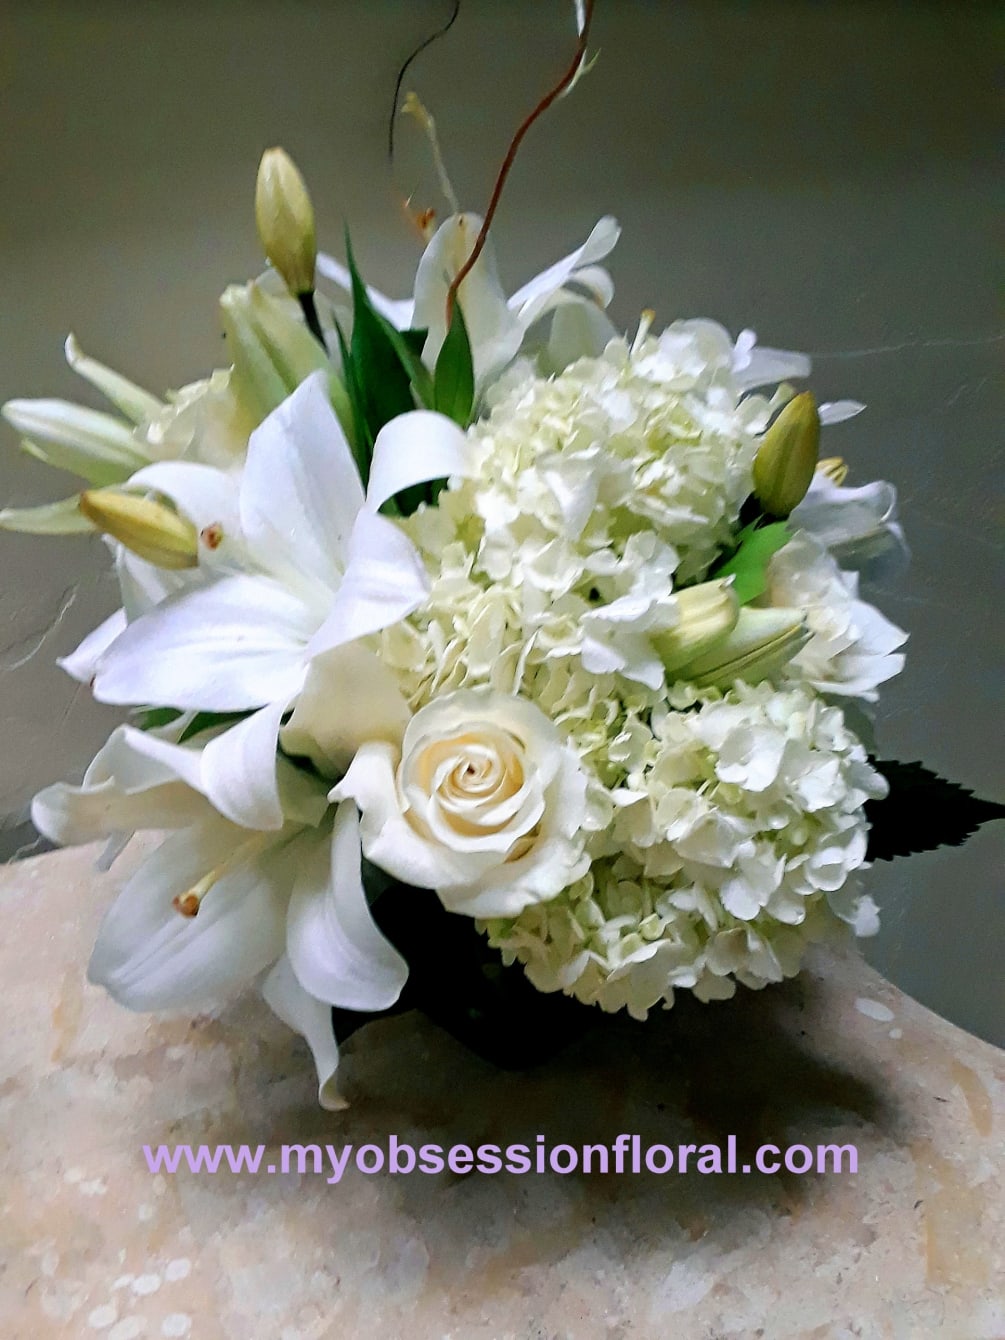 There&#039;s no need to describe this perfect arrangement. Great for any occasion.